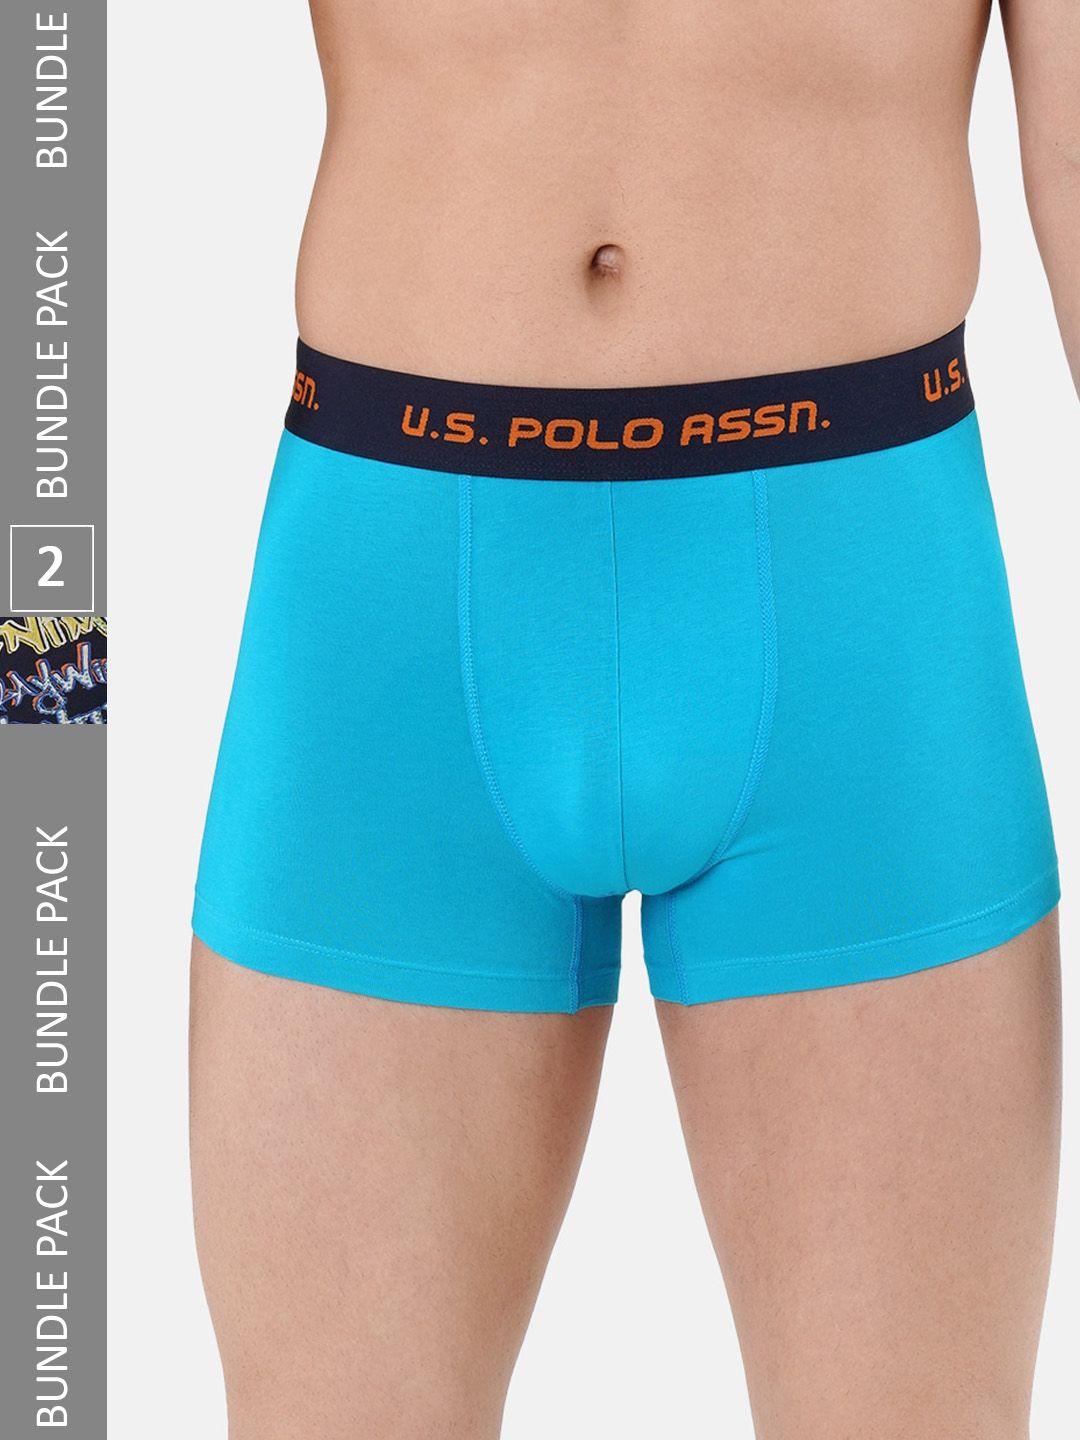 u.s. polo assn. pack of 2 cotton stretch trunks